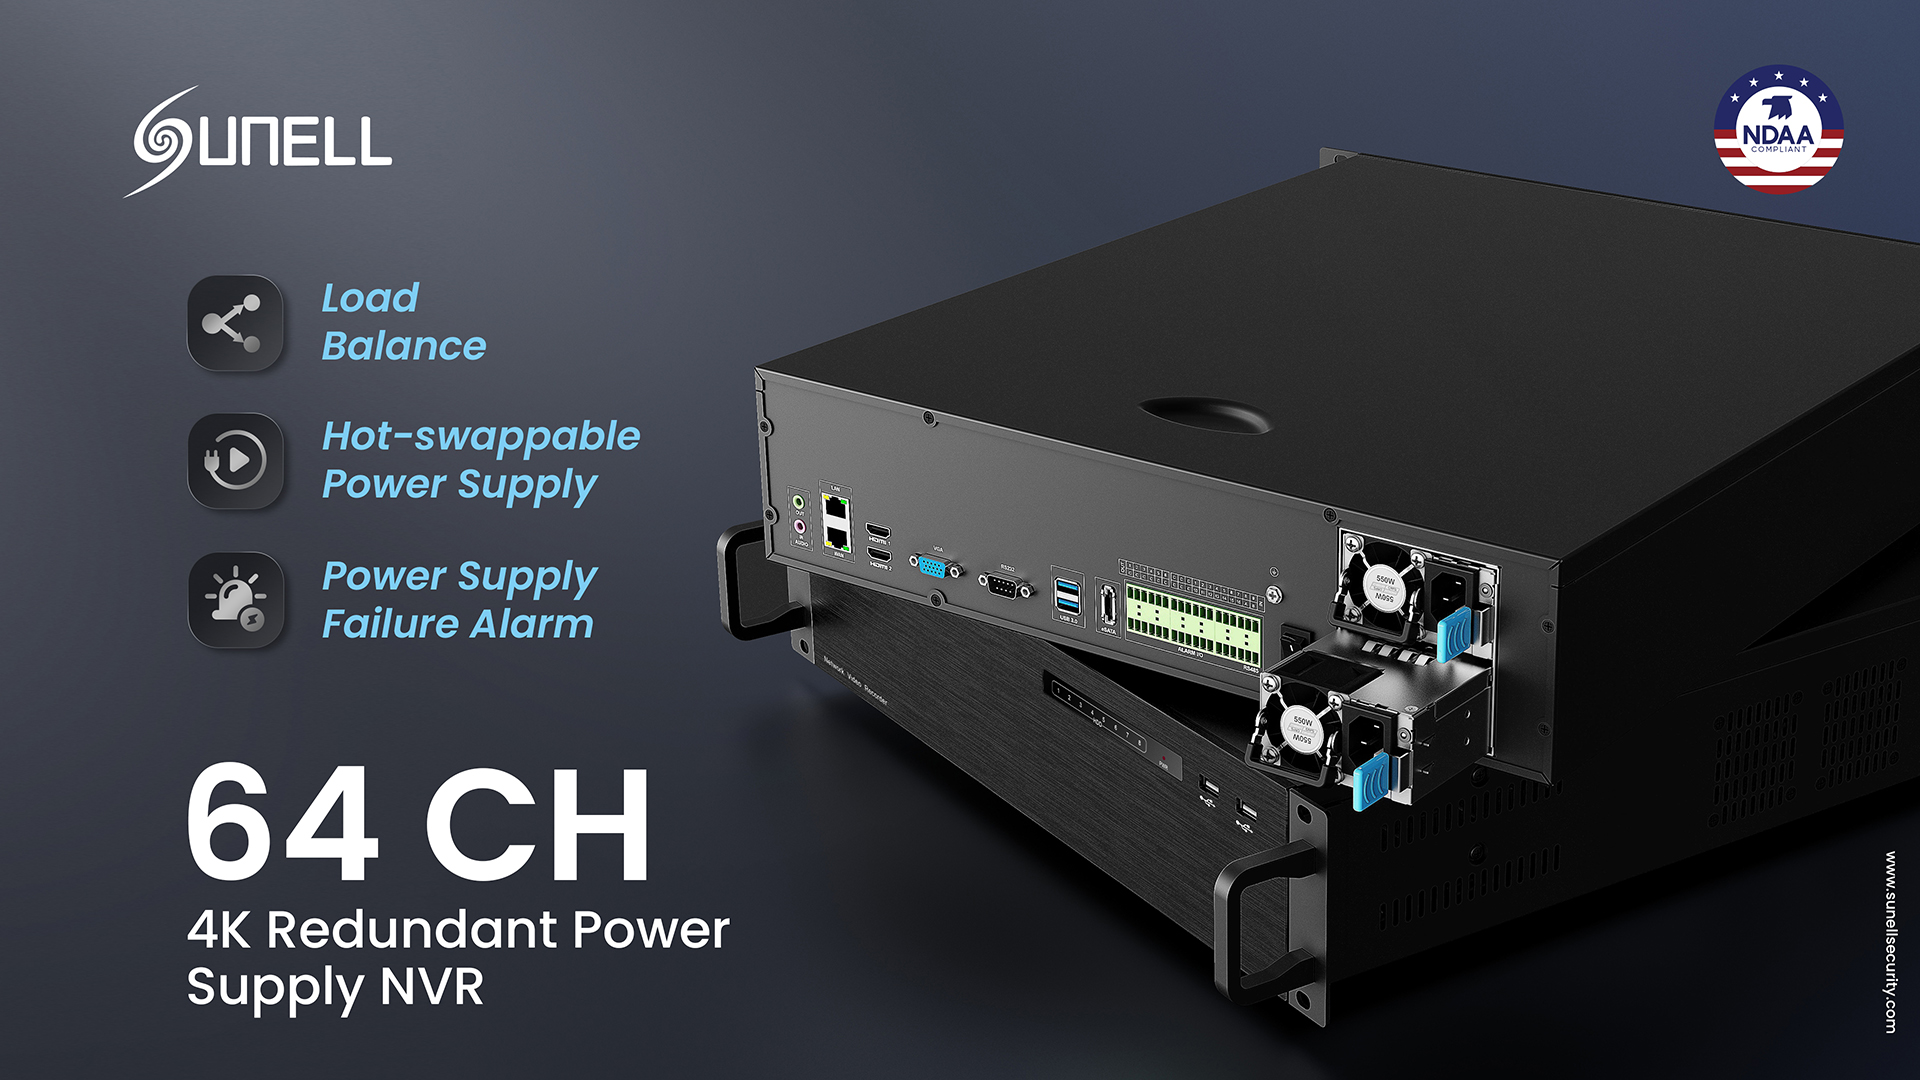 Sunell_Launches_the_New_64-Channel_4K_Redundant_Power_NVR_to_Ensure_Stable_Surveillance.jpg